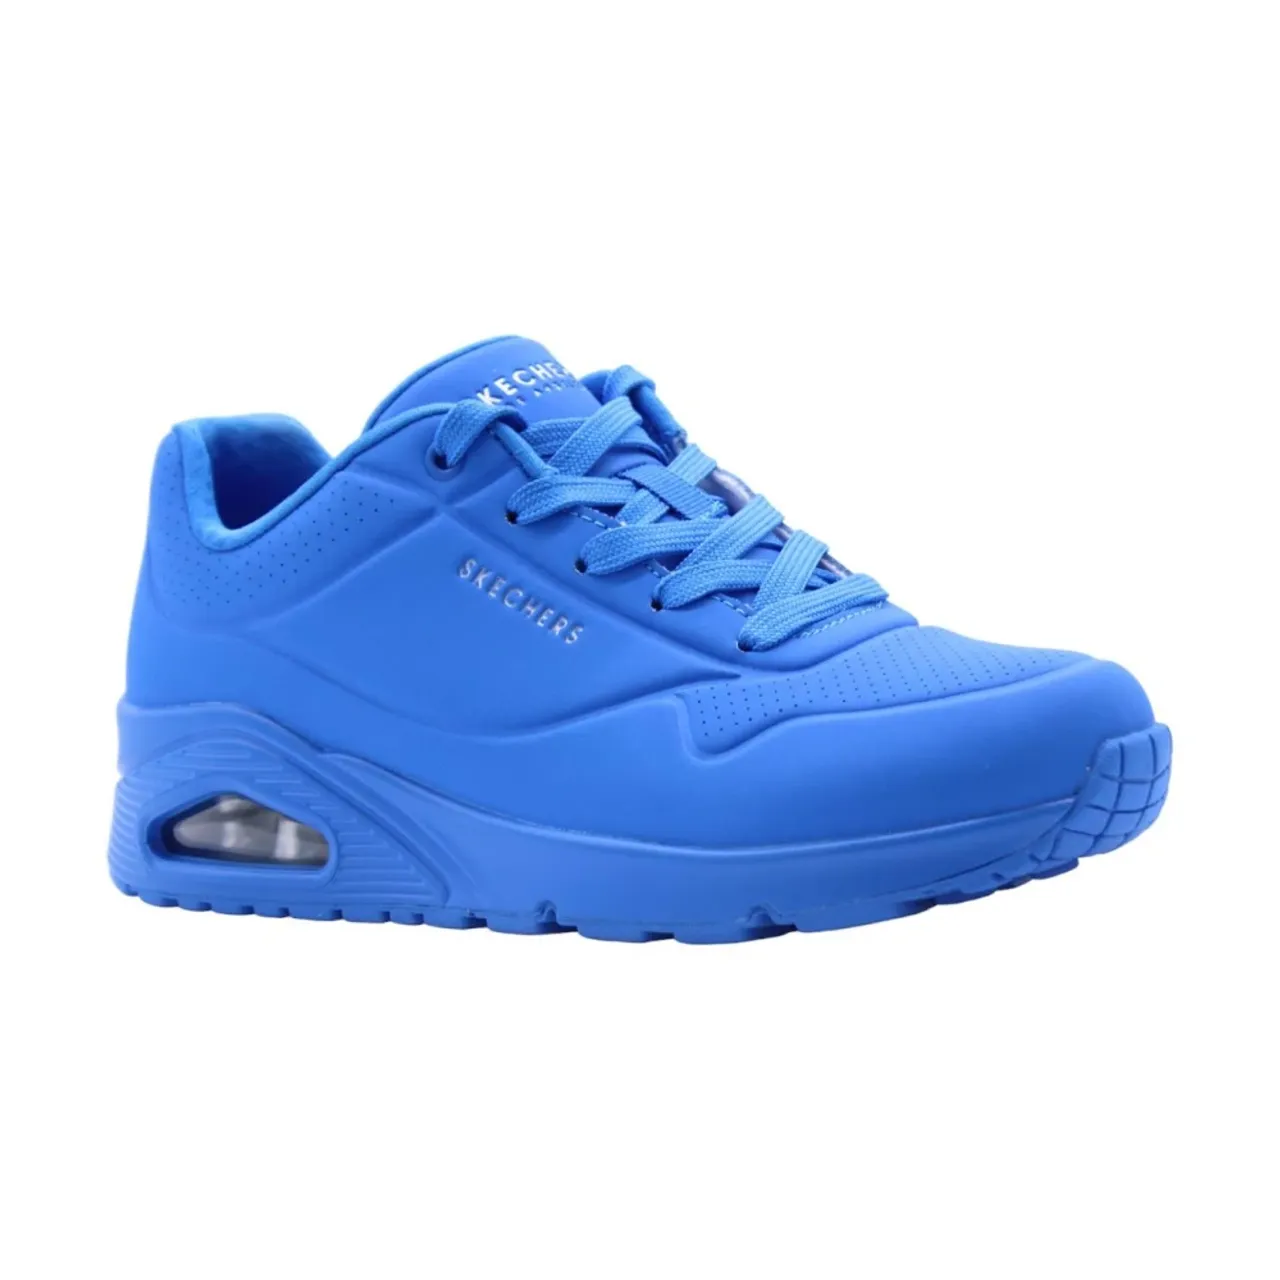 Skechers , Backy Sneaker - Stylish and Comfortable ,Blue female, Sizes: